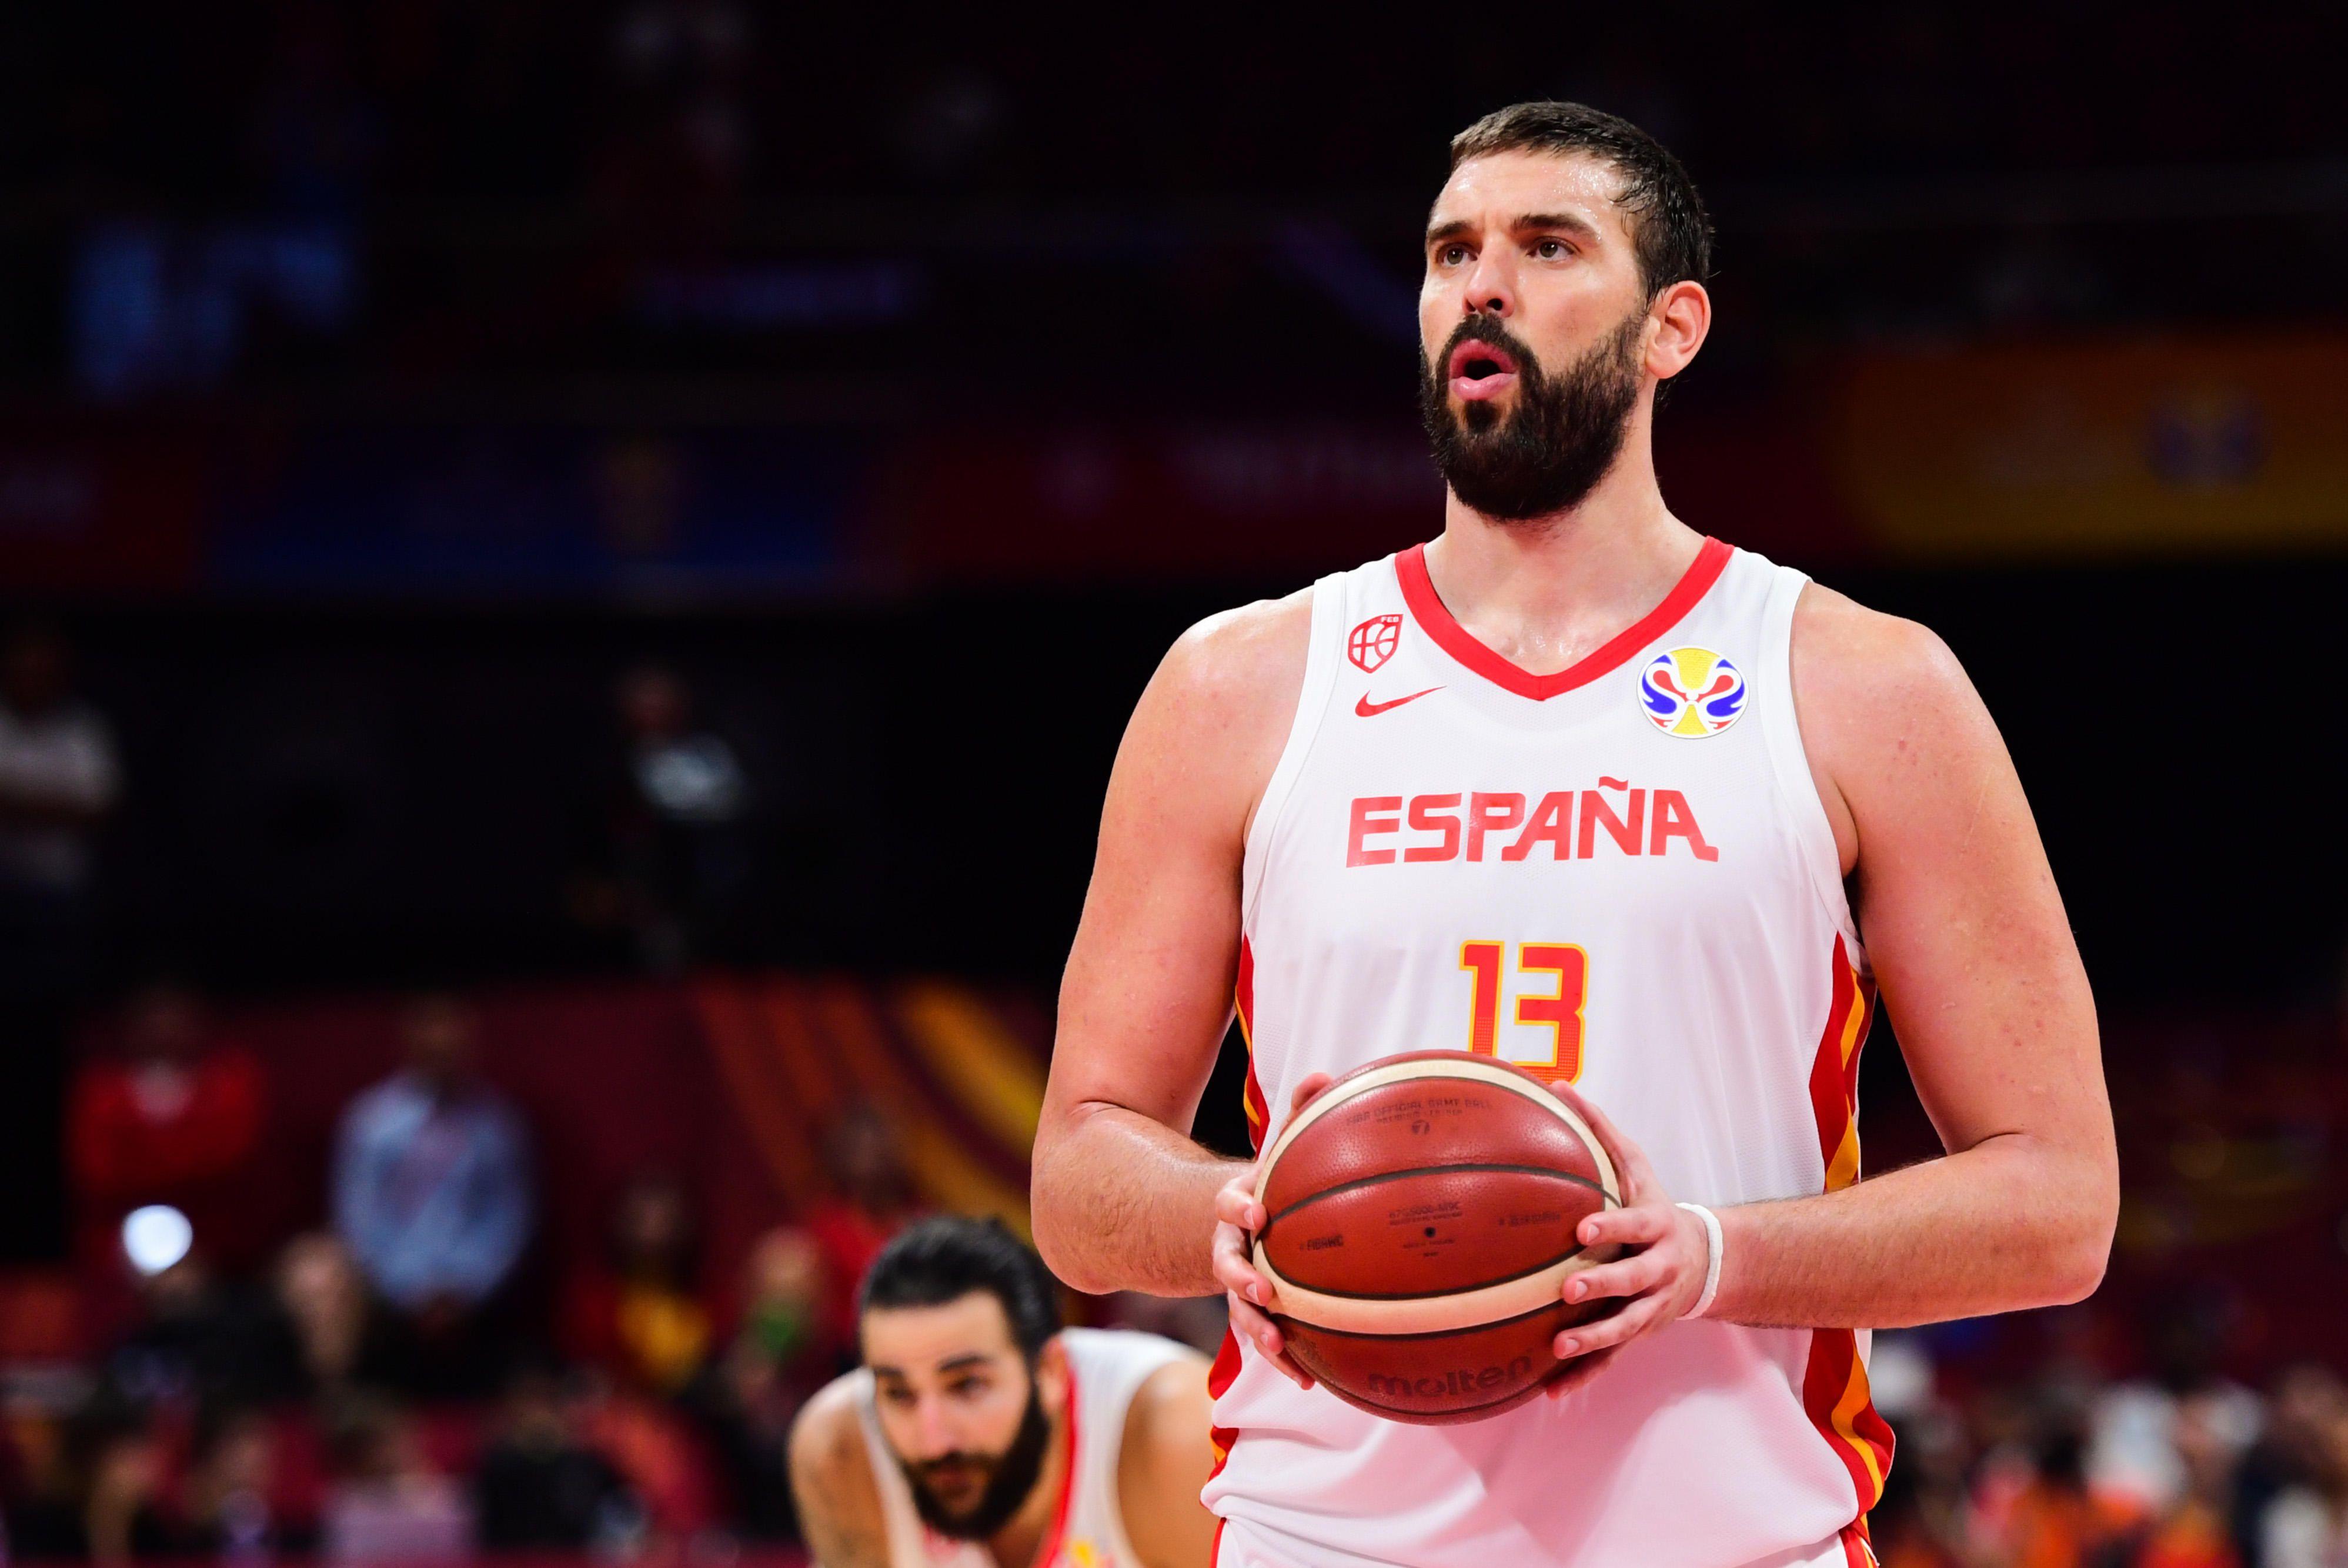 FIBA Basketball World Cup 2019: How to watch the final